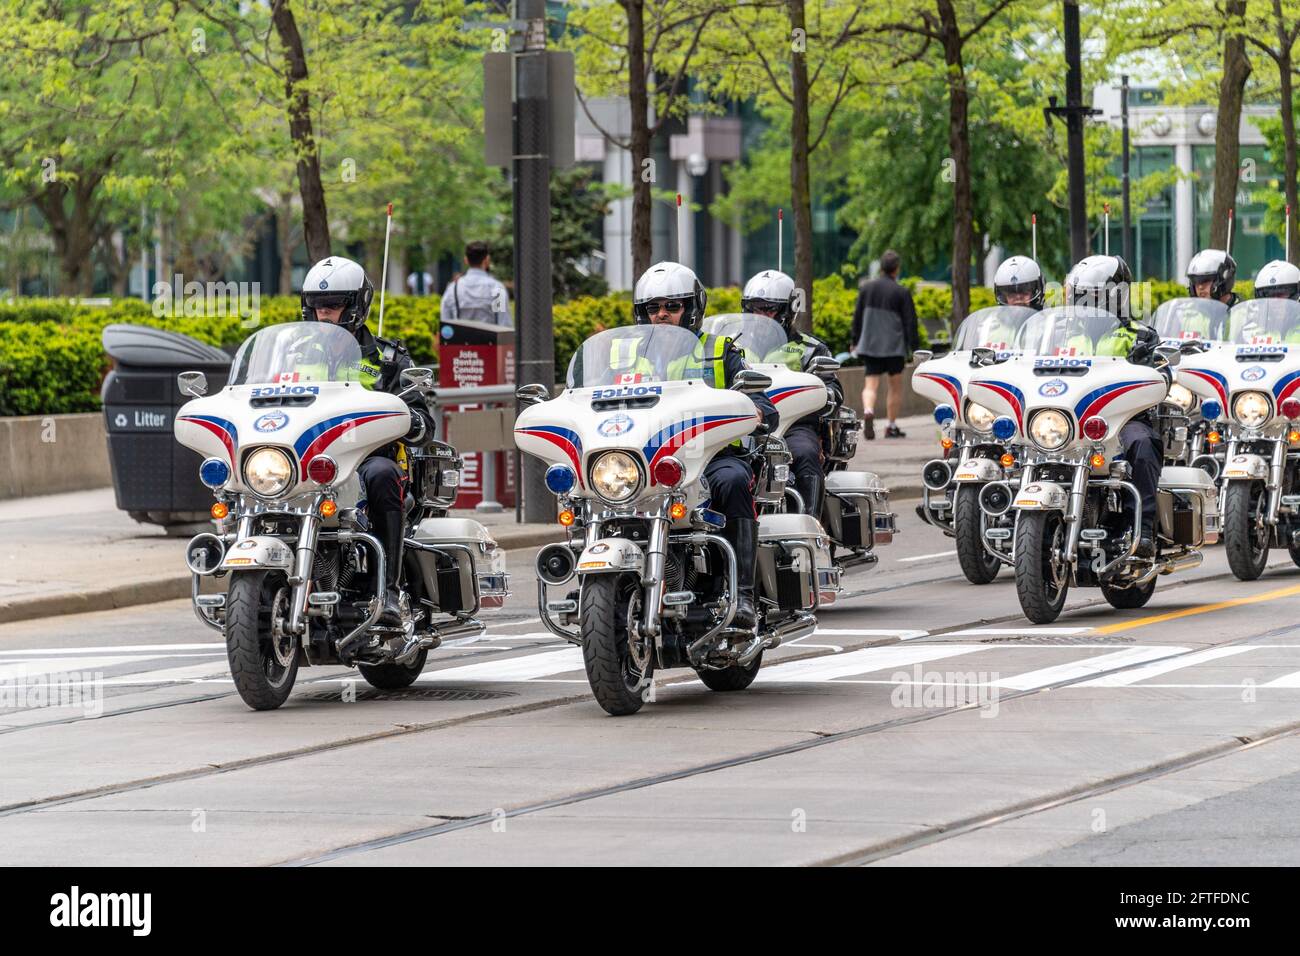 Toronto Police Department. A group of police officers is seen riding motorcycles in King Street in the Toronto downtown district, Canada Stock Photo